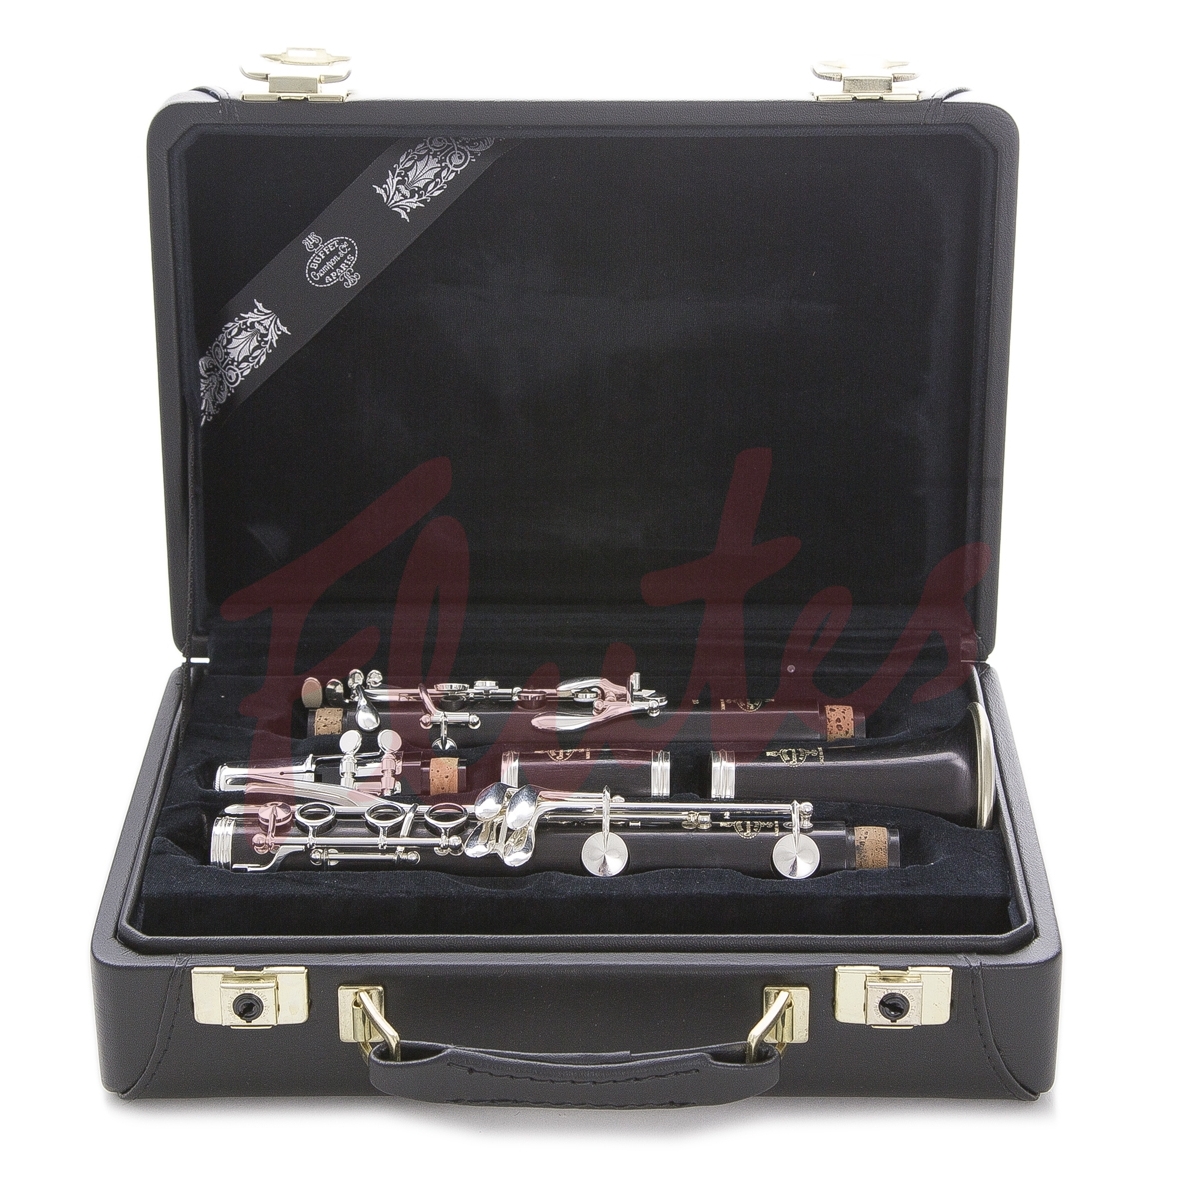 Buffet-Crampon BC1102C-2-0 E13 Bb Clarinet in Traditional Case